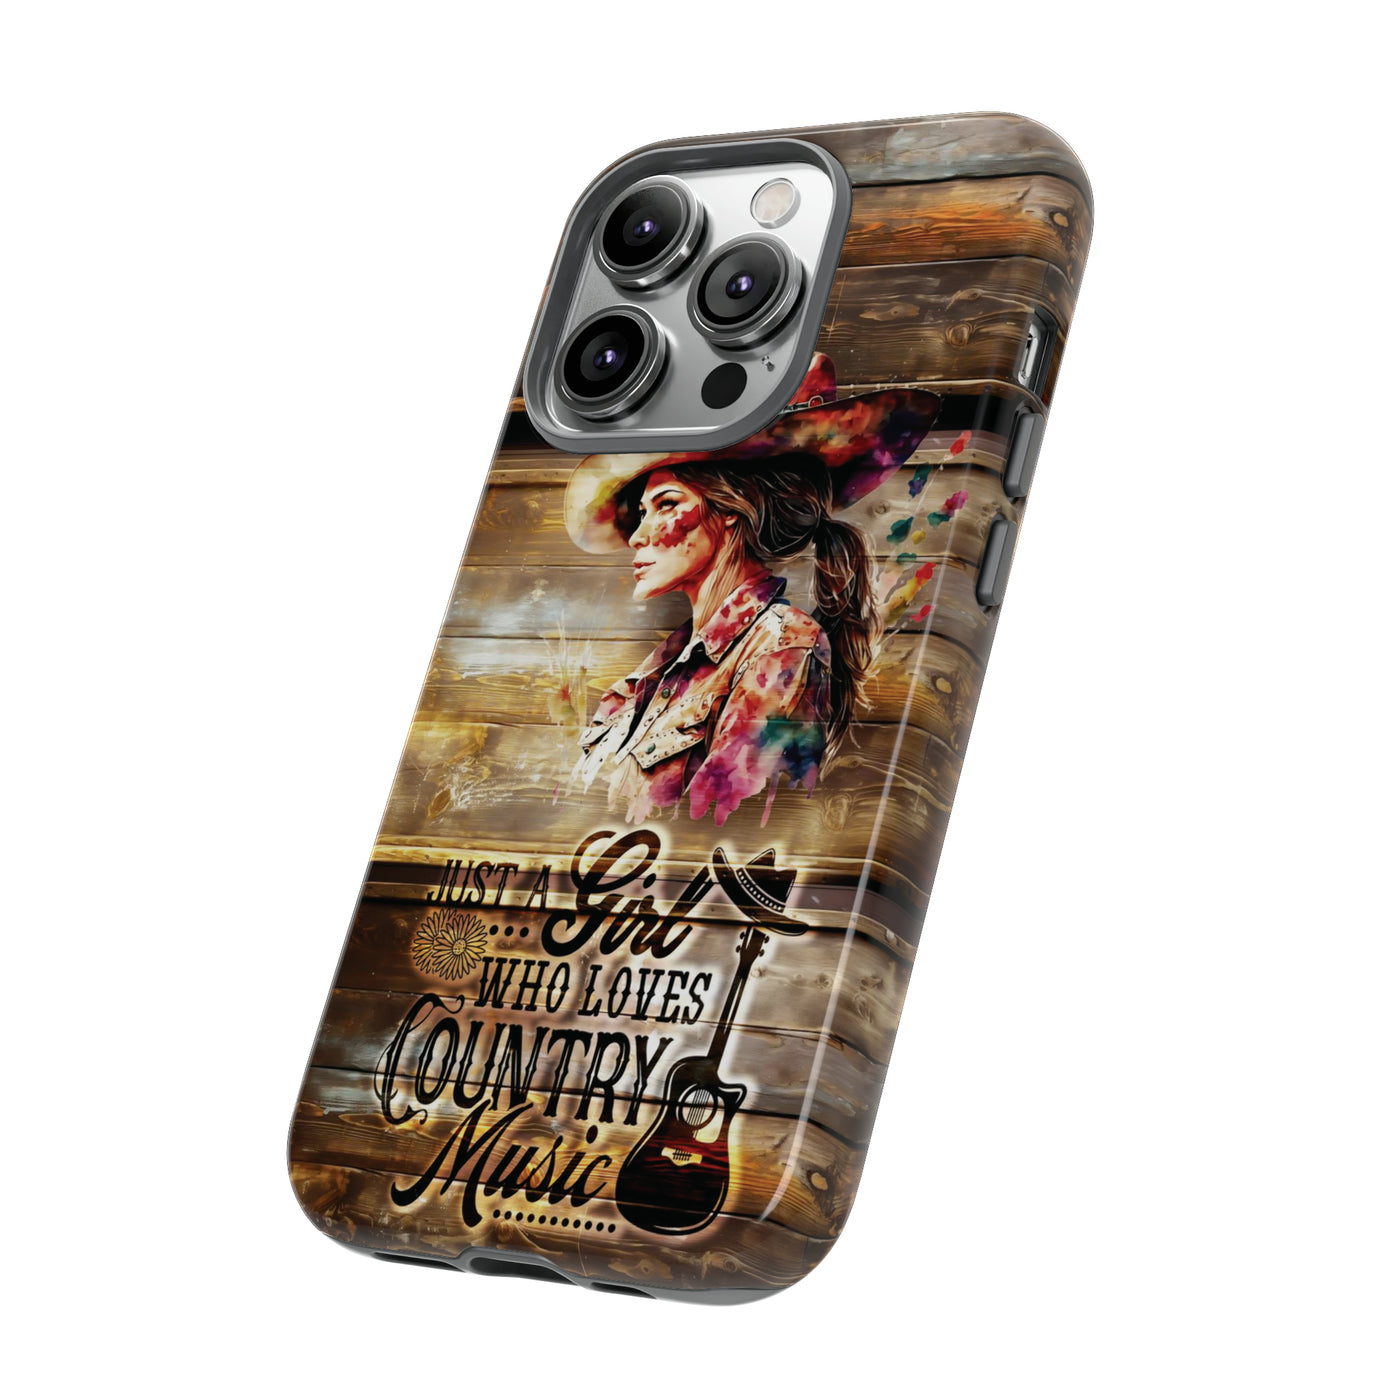 Cute IPhone Case | Country Music Girl iPhone 15 Case | iPhone 15 Pro Case, Iphone 14 Case, Iphone 14 Pro Max Case, Protective Iphone Case